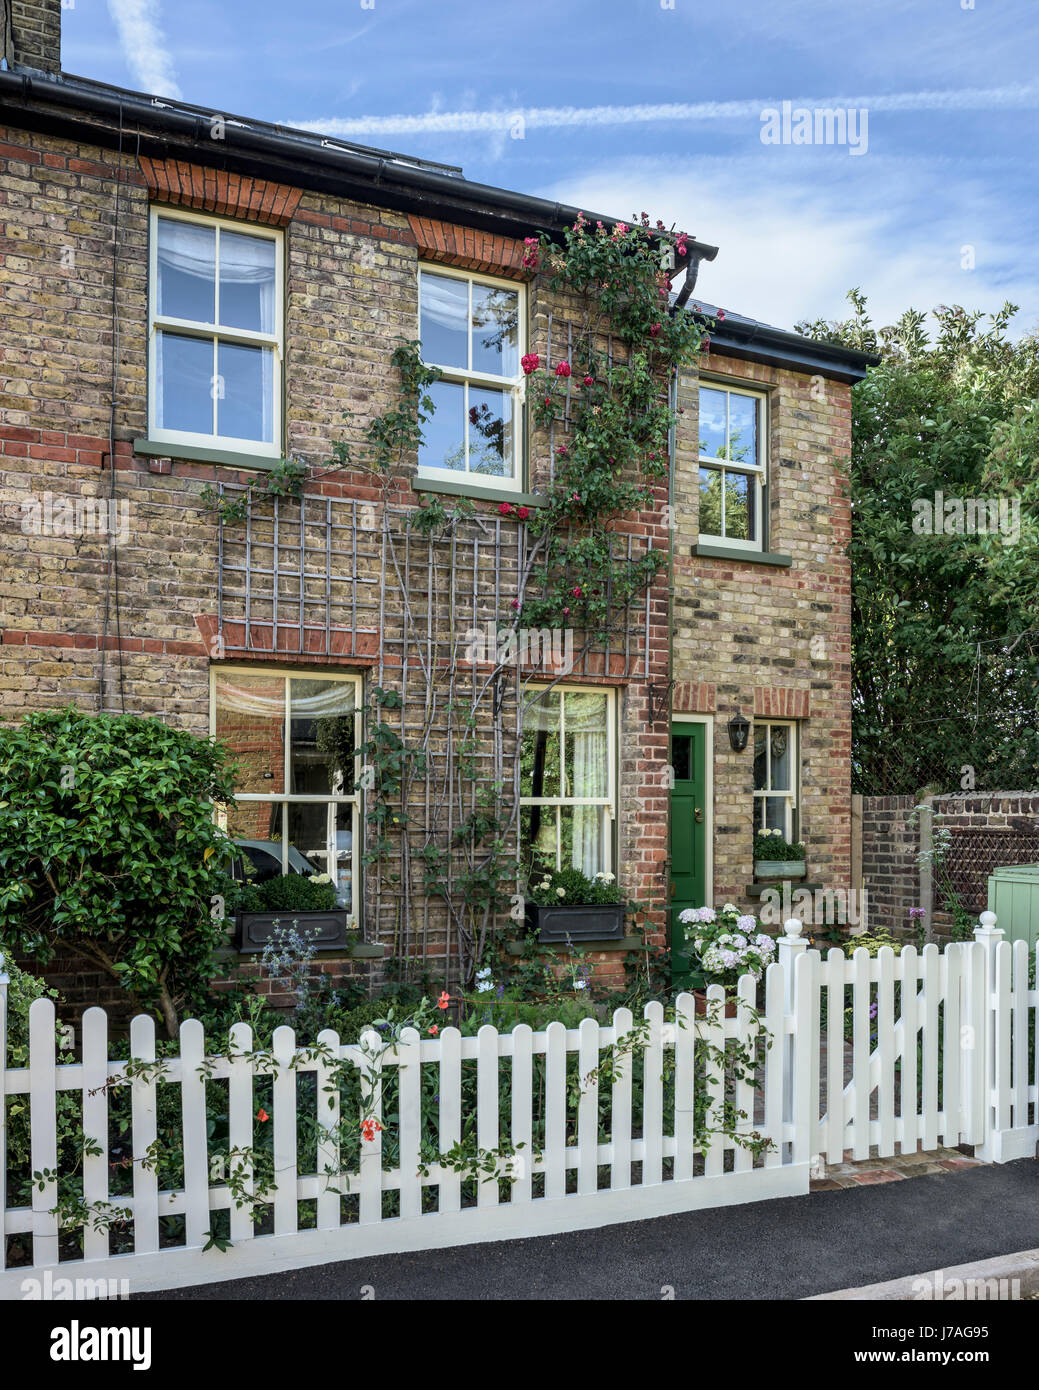 Exterior facade of late Victorian cottage with tiled path and green front door Stock Photo